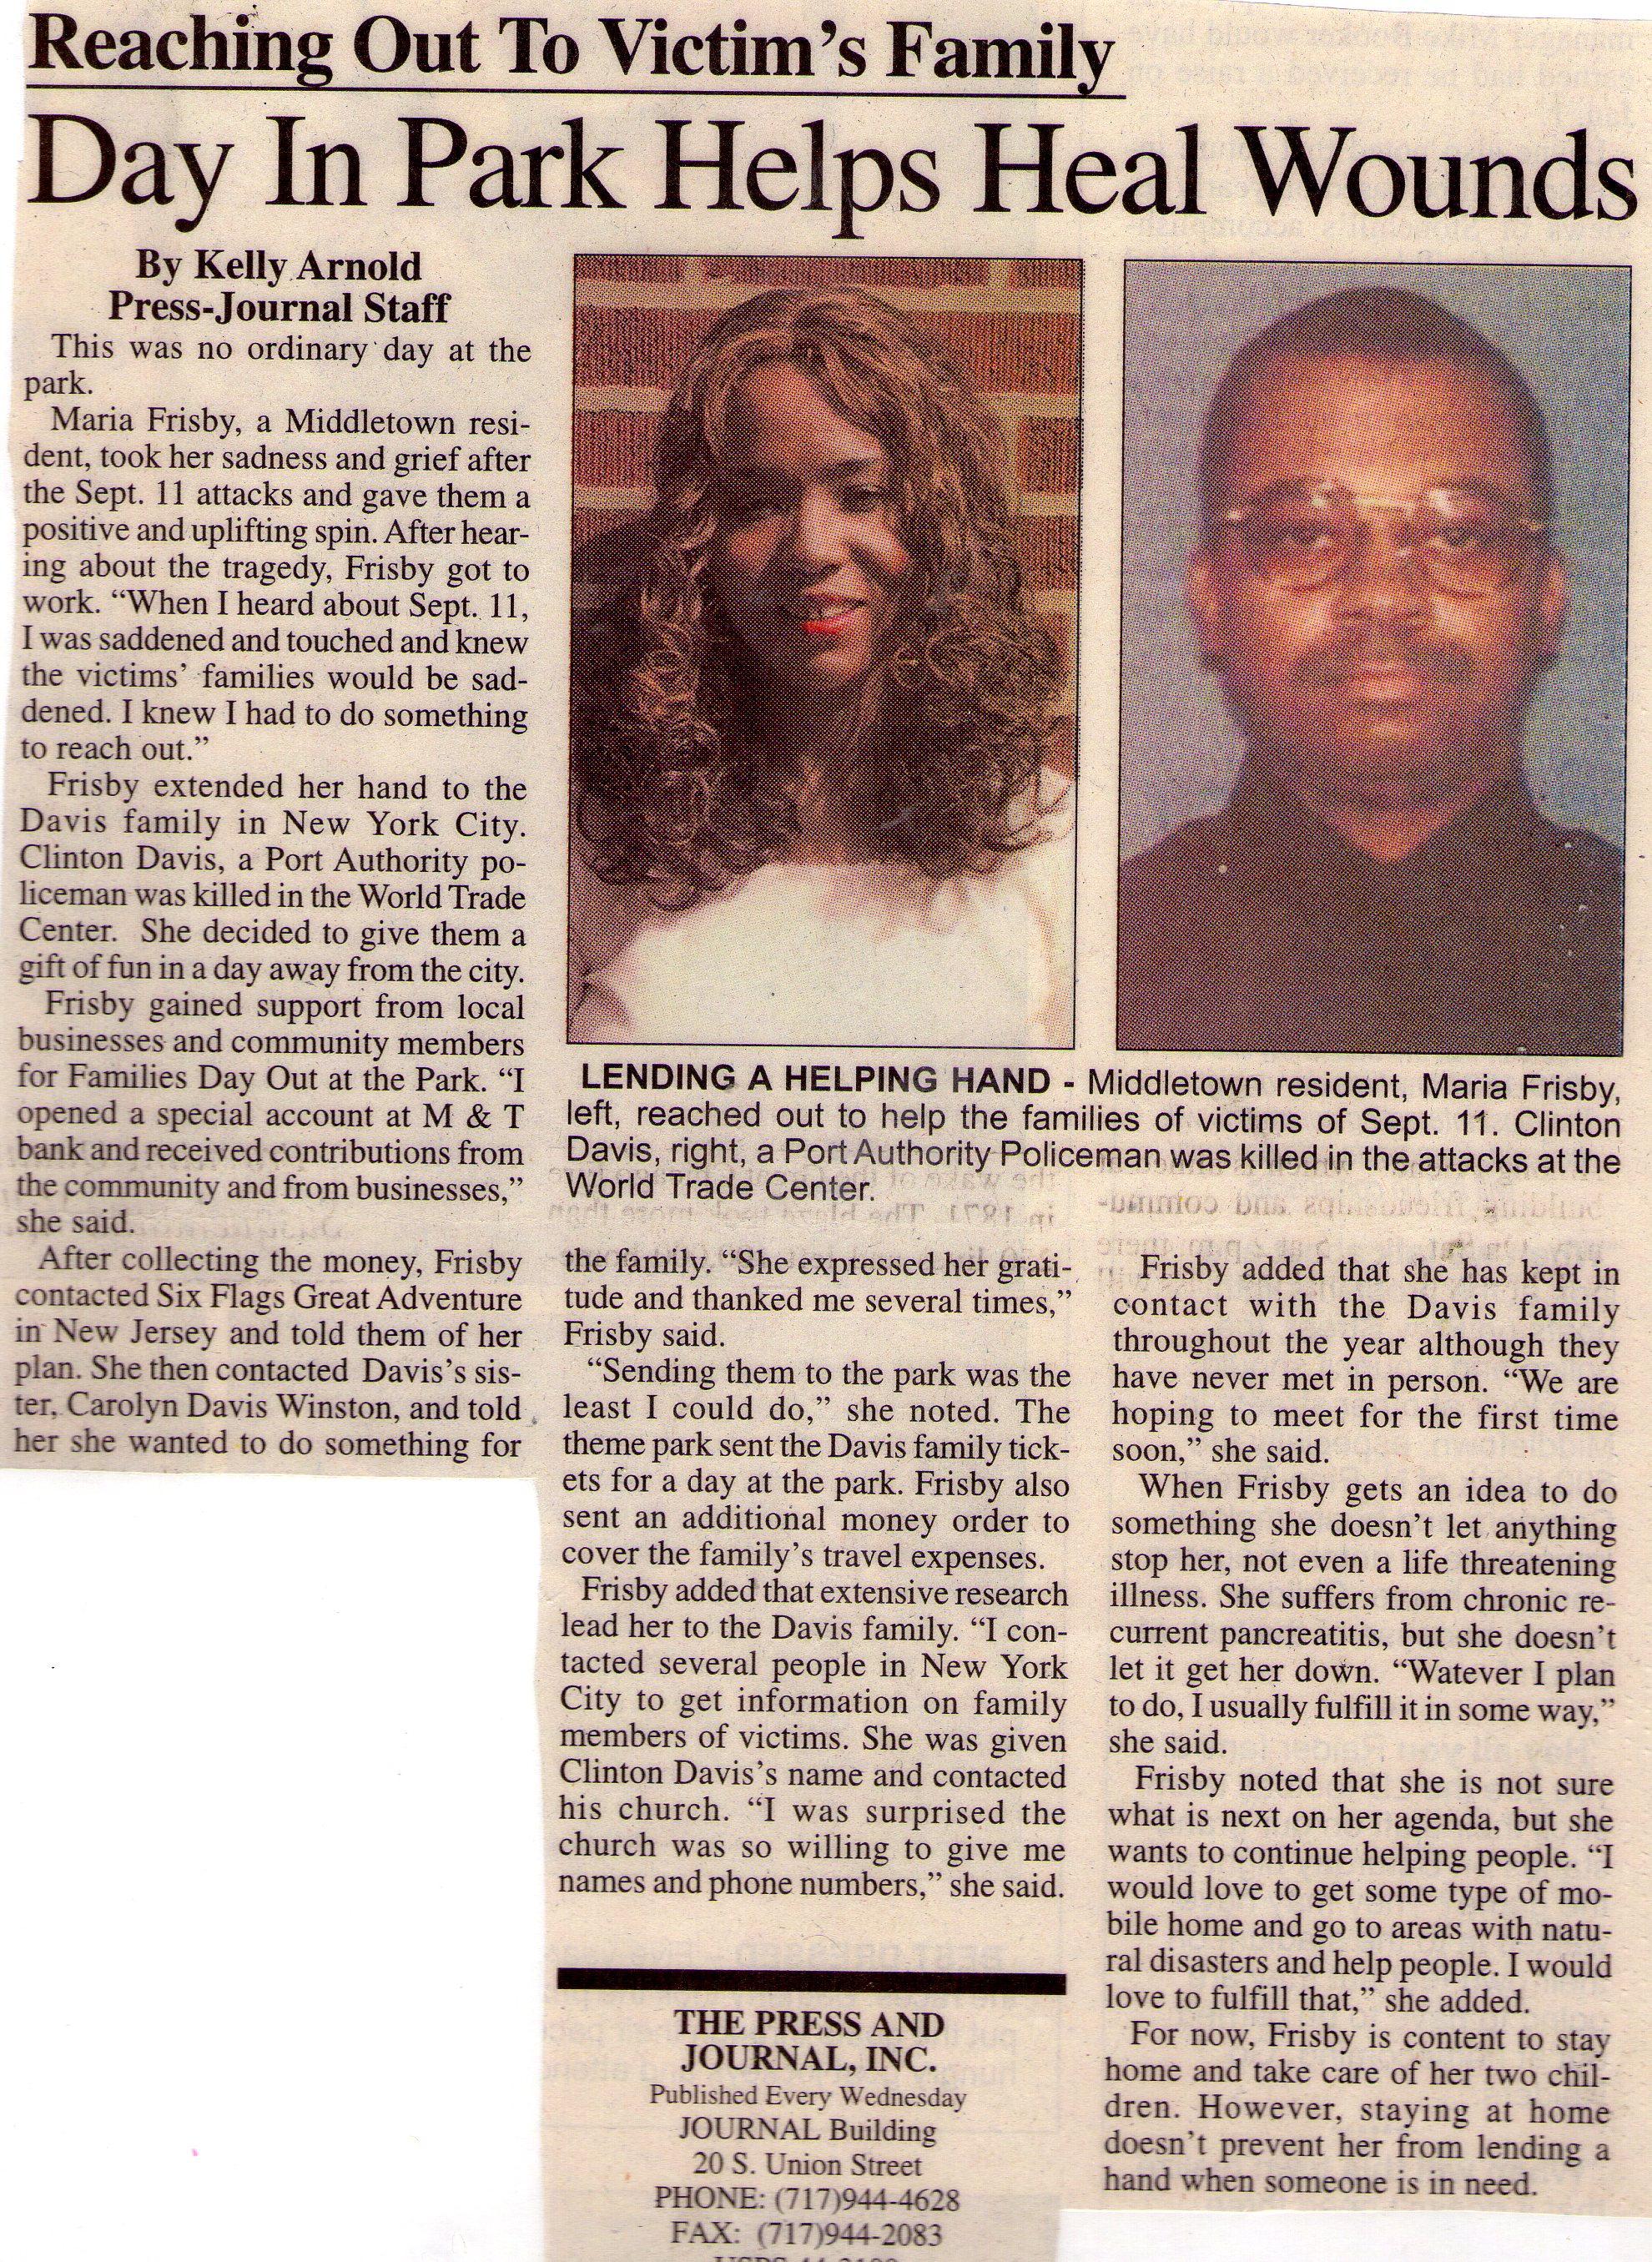 An article about Maria Frisby doing a project to help the families of victims killed on 9/11.